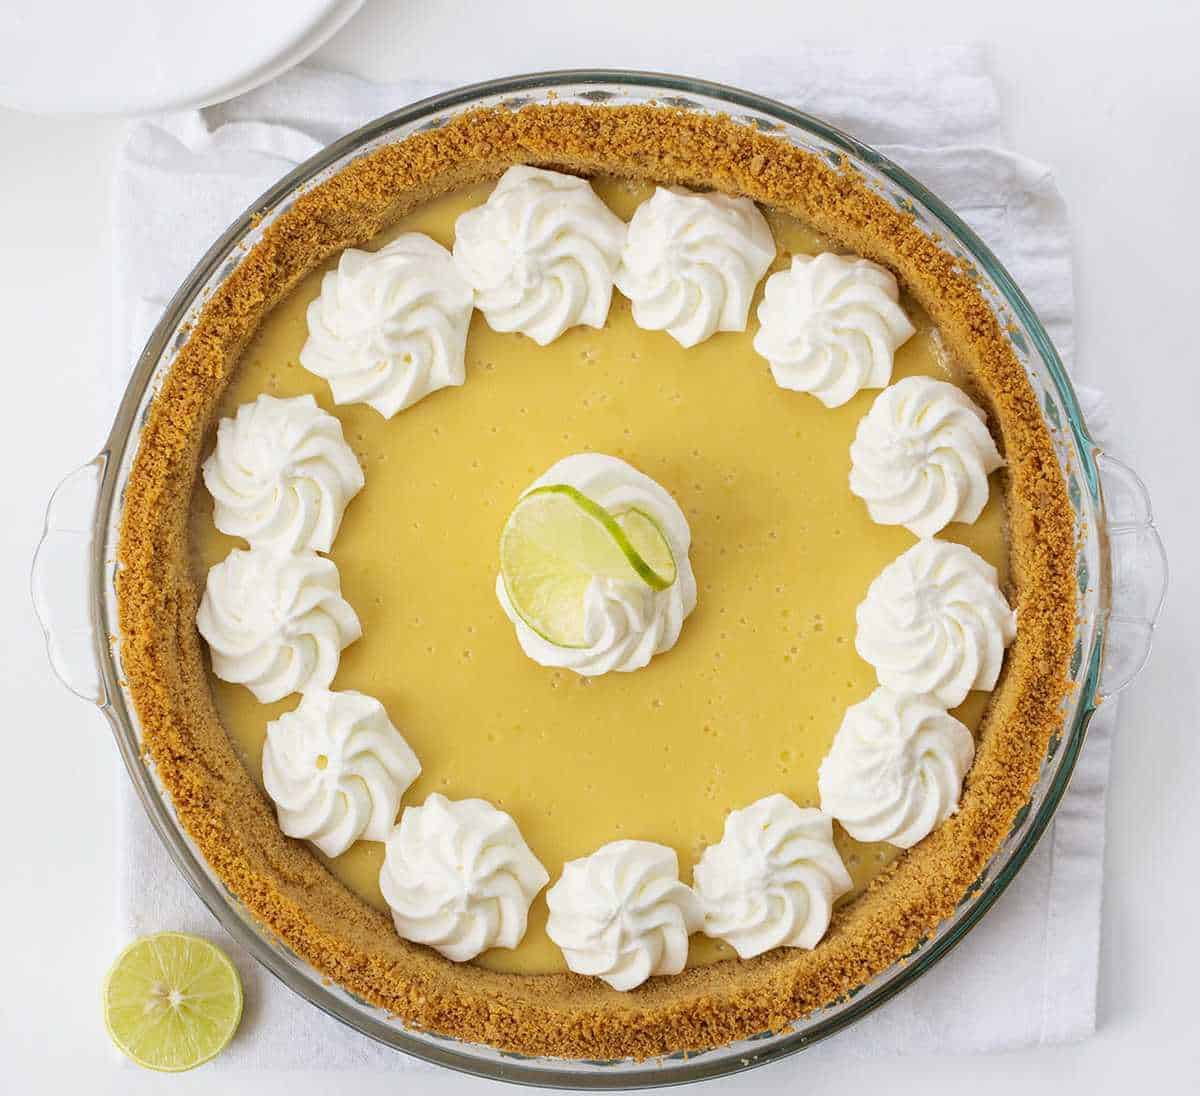 Overhead View of Key Lime Pie with Whipped Cream Dollops and a sliced key lime next to it